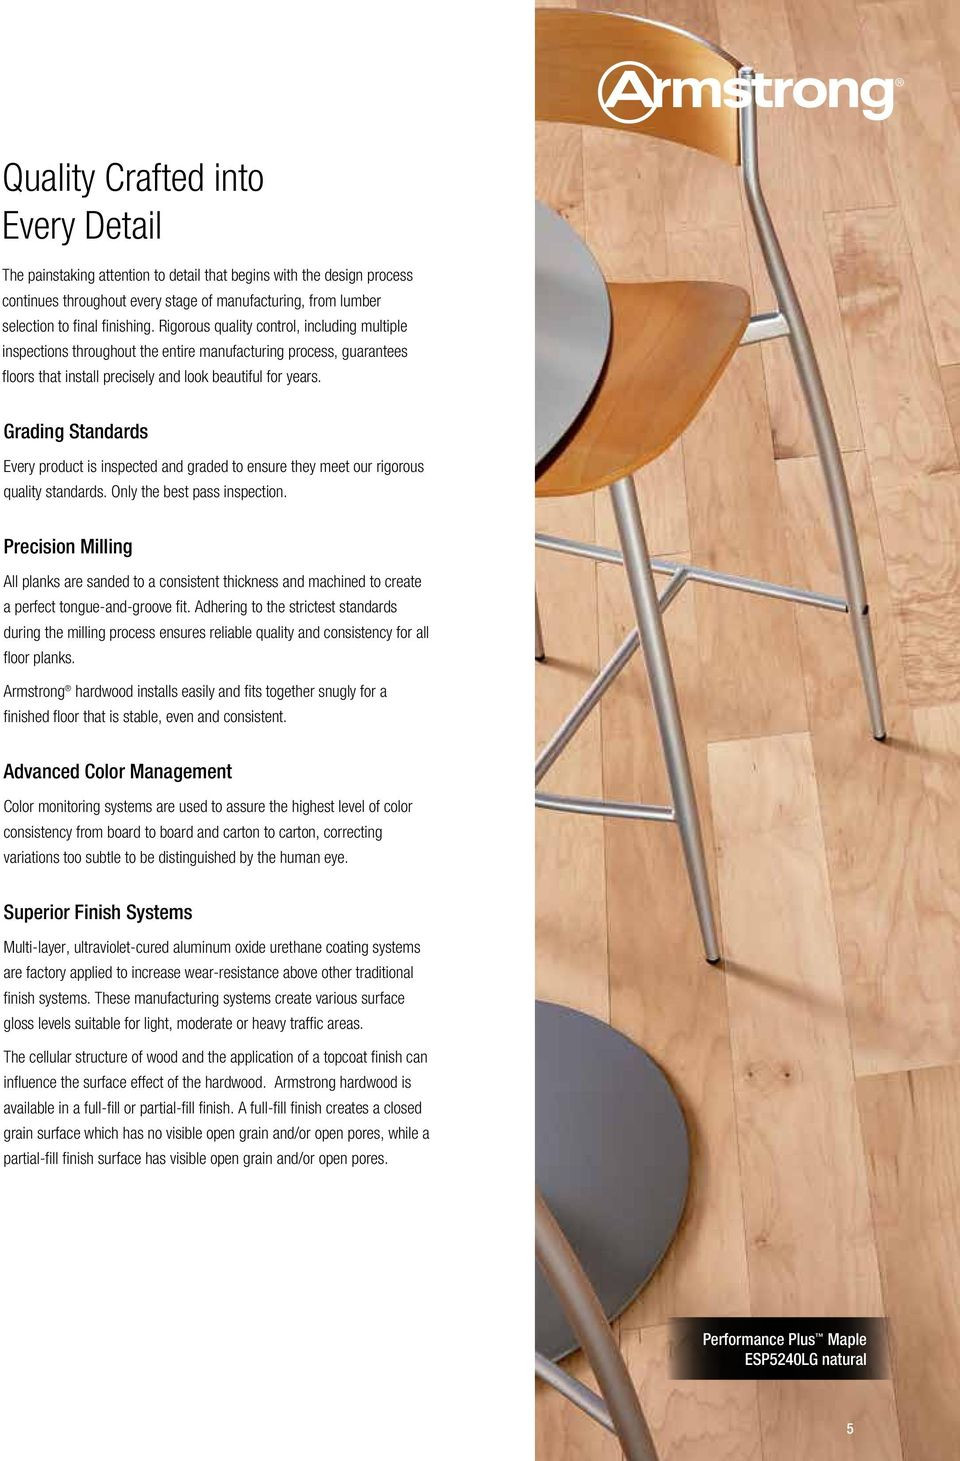 17 Fashionable Recommended Humidity Level for Hardwood Floors 2024 free download recommended humidity level for hardwood floors of performance plus midtown pdf within grading standards every product is inspected and graded to ensure they meet our rigorous quality standar